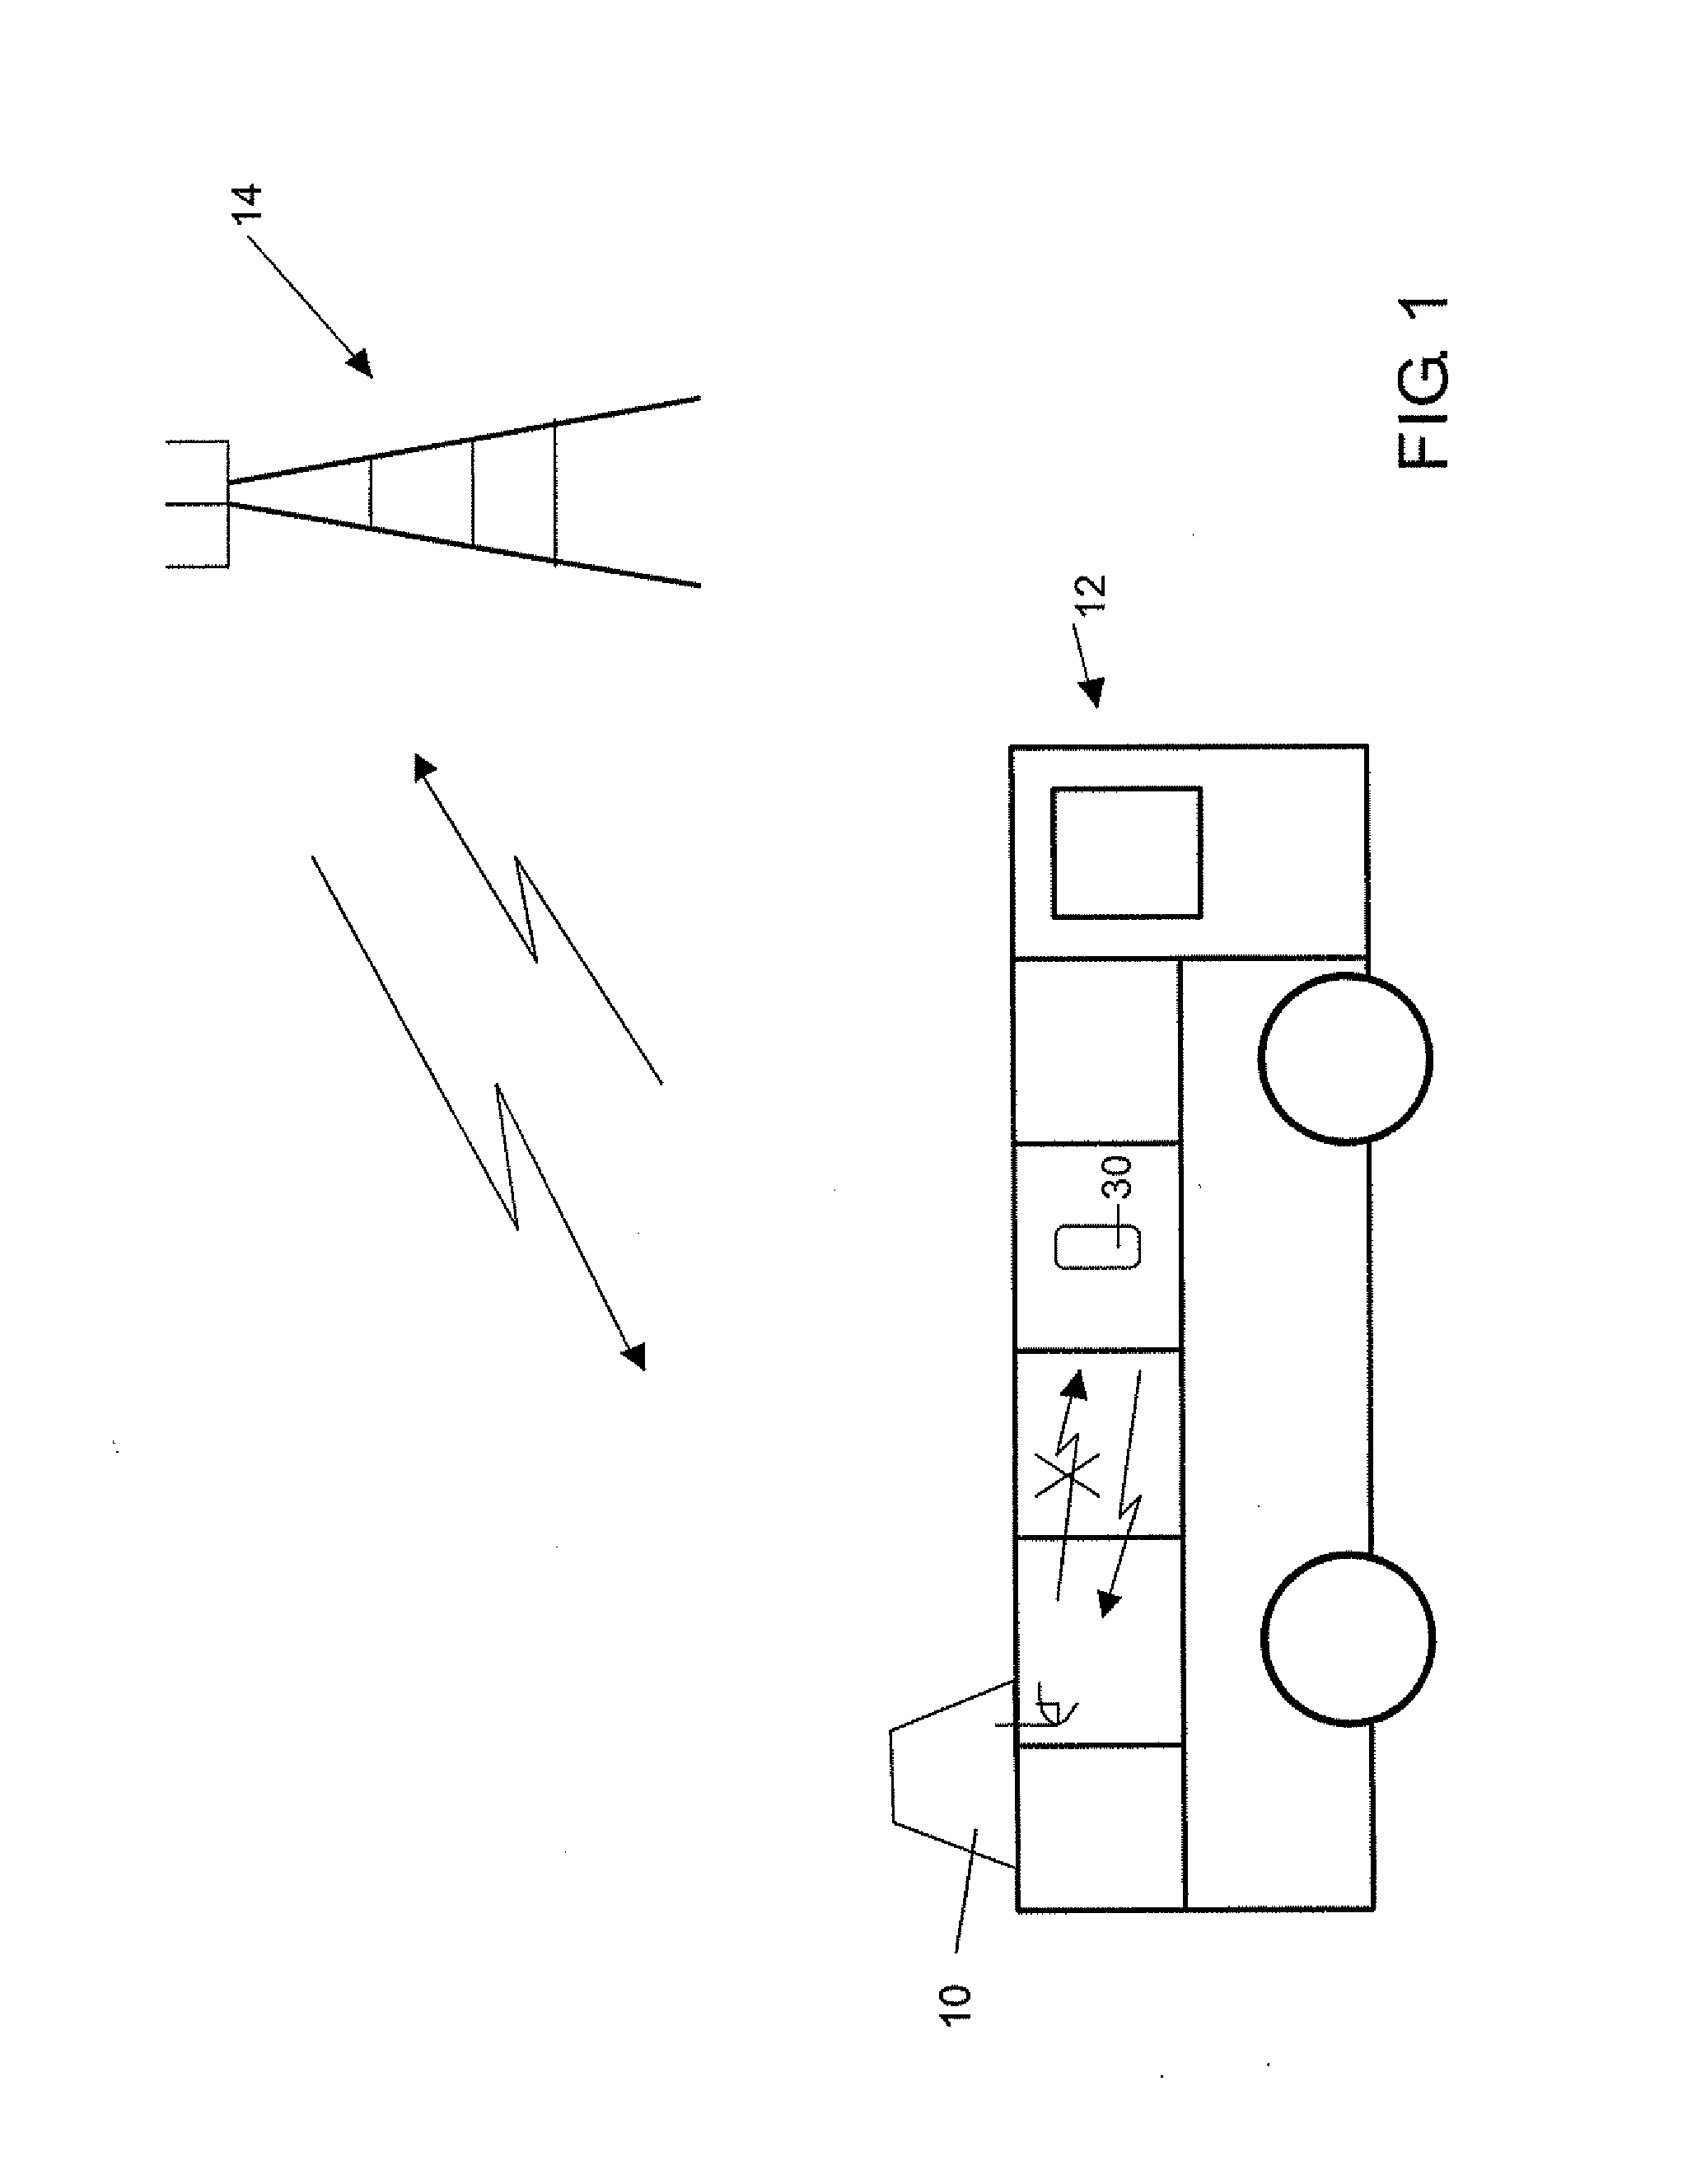 Intelligent asymmetric service denial system for mobile cellular devices and associated methods